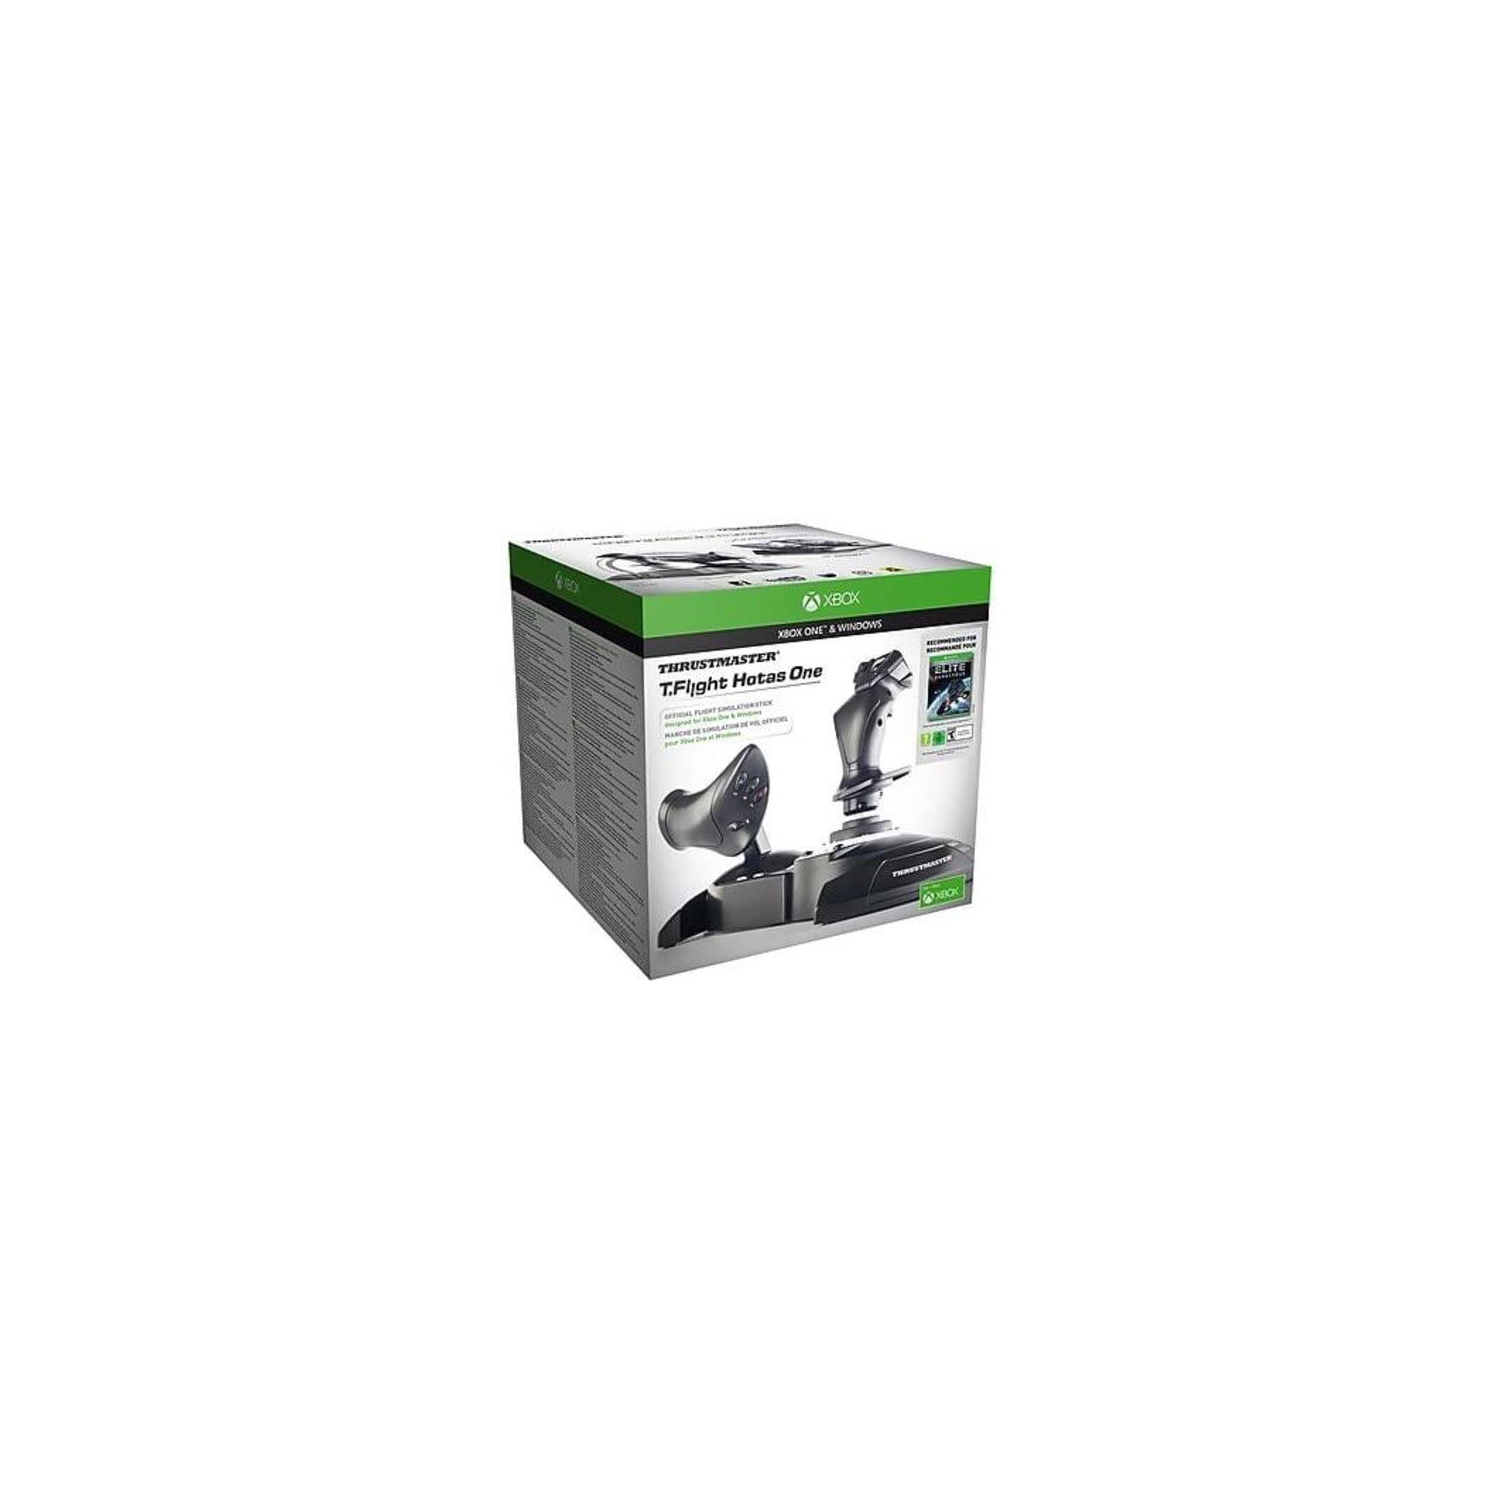 Refurbished (Excellent) - Thrustmaster T Flight Hotas One Xbox One / PC